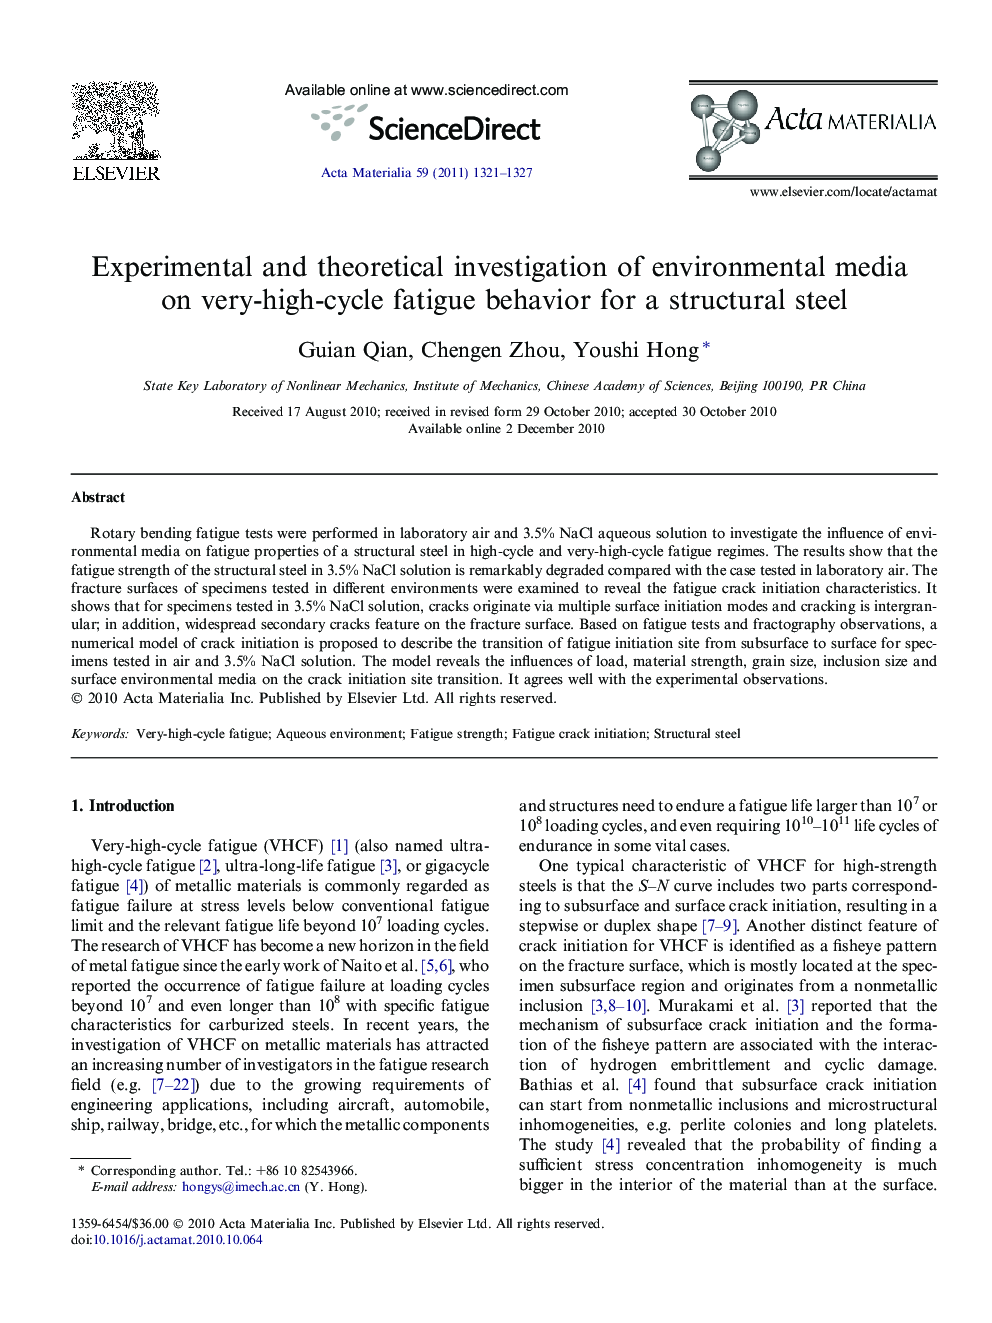 Experimental and theoretical investigation of environmental media on very-high-cycle fatigue behavior for a structural steel